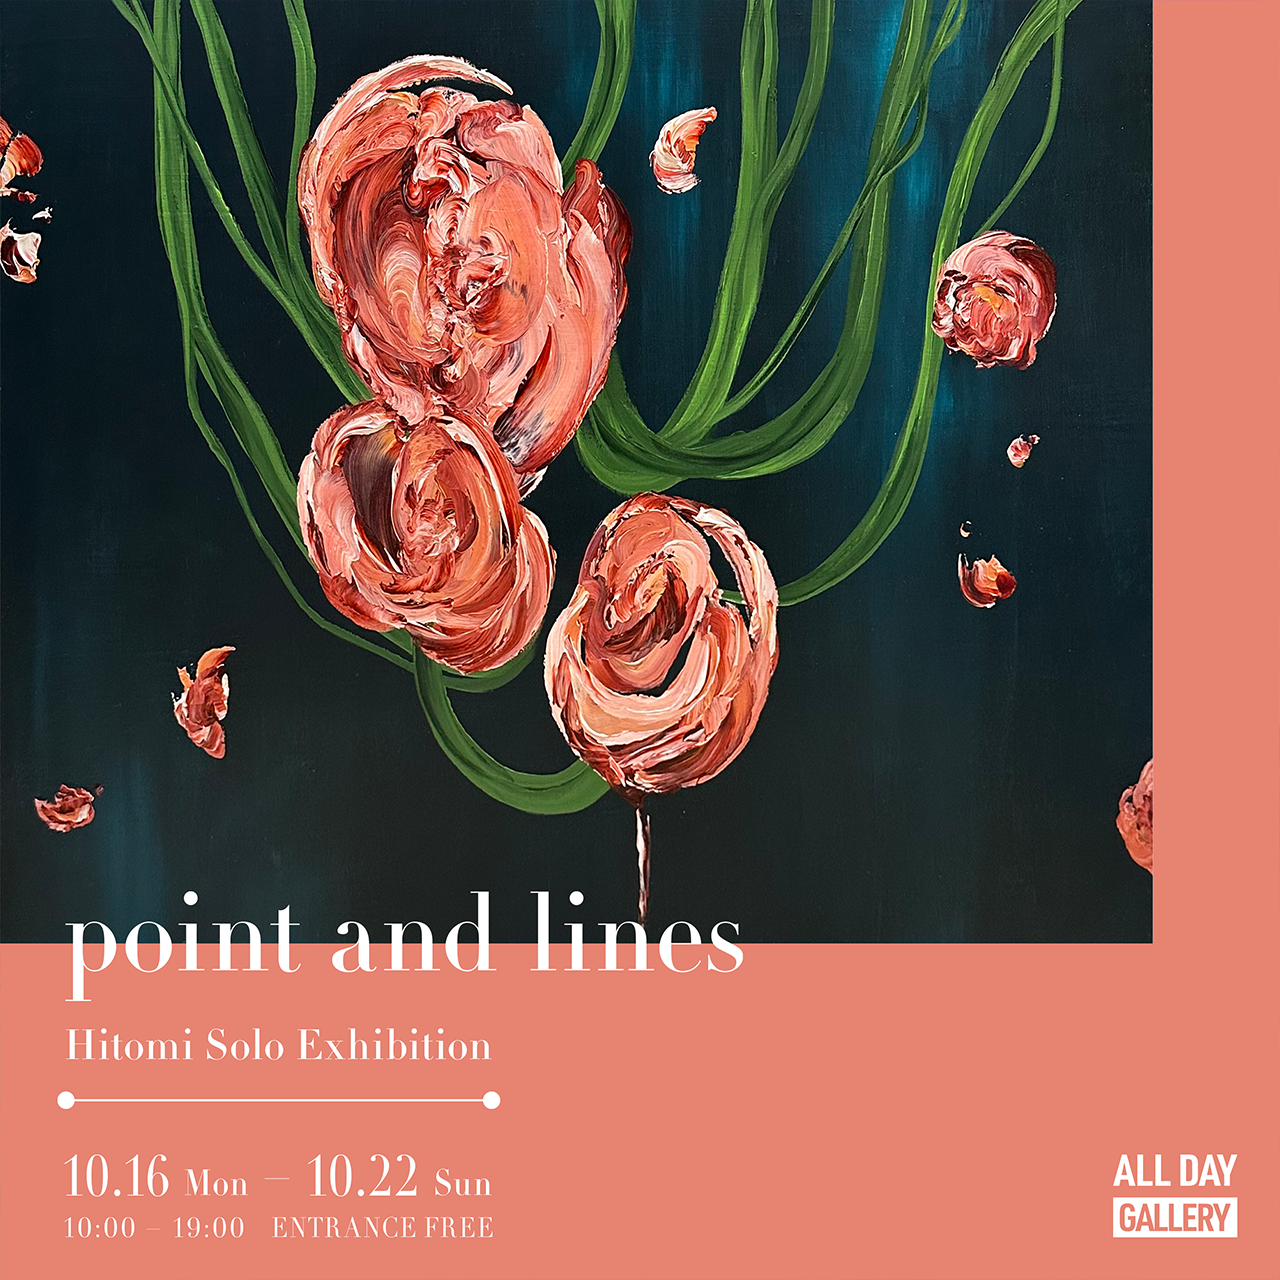 Hitomi Solo Exhibition “point and lines”